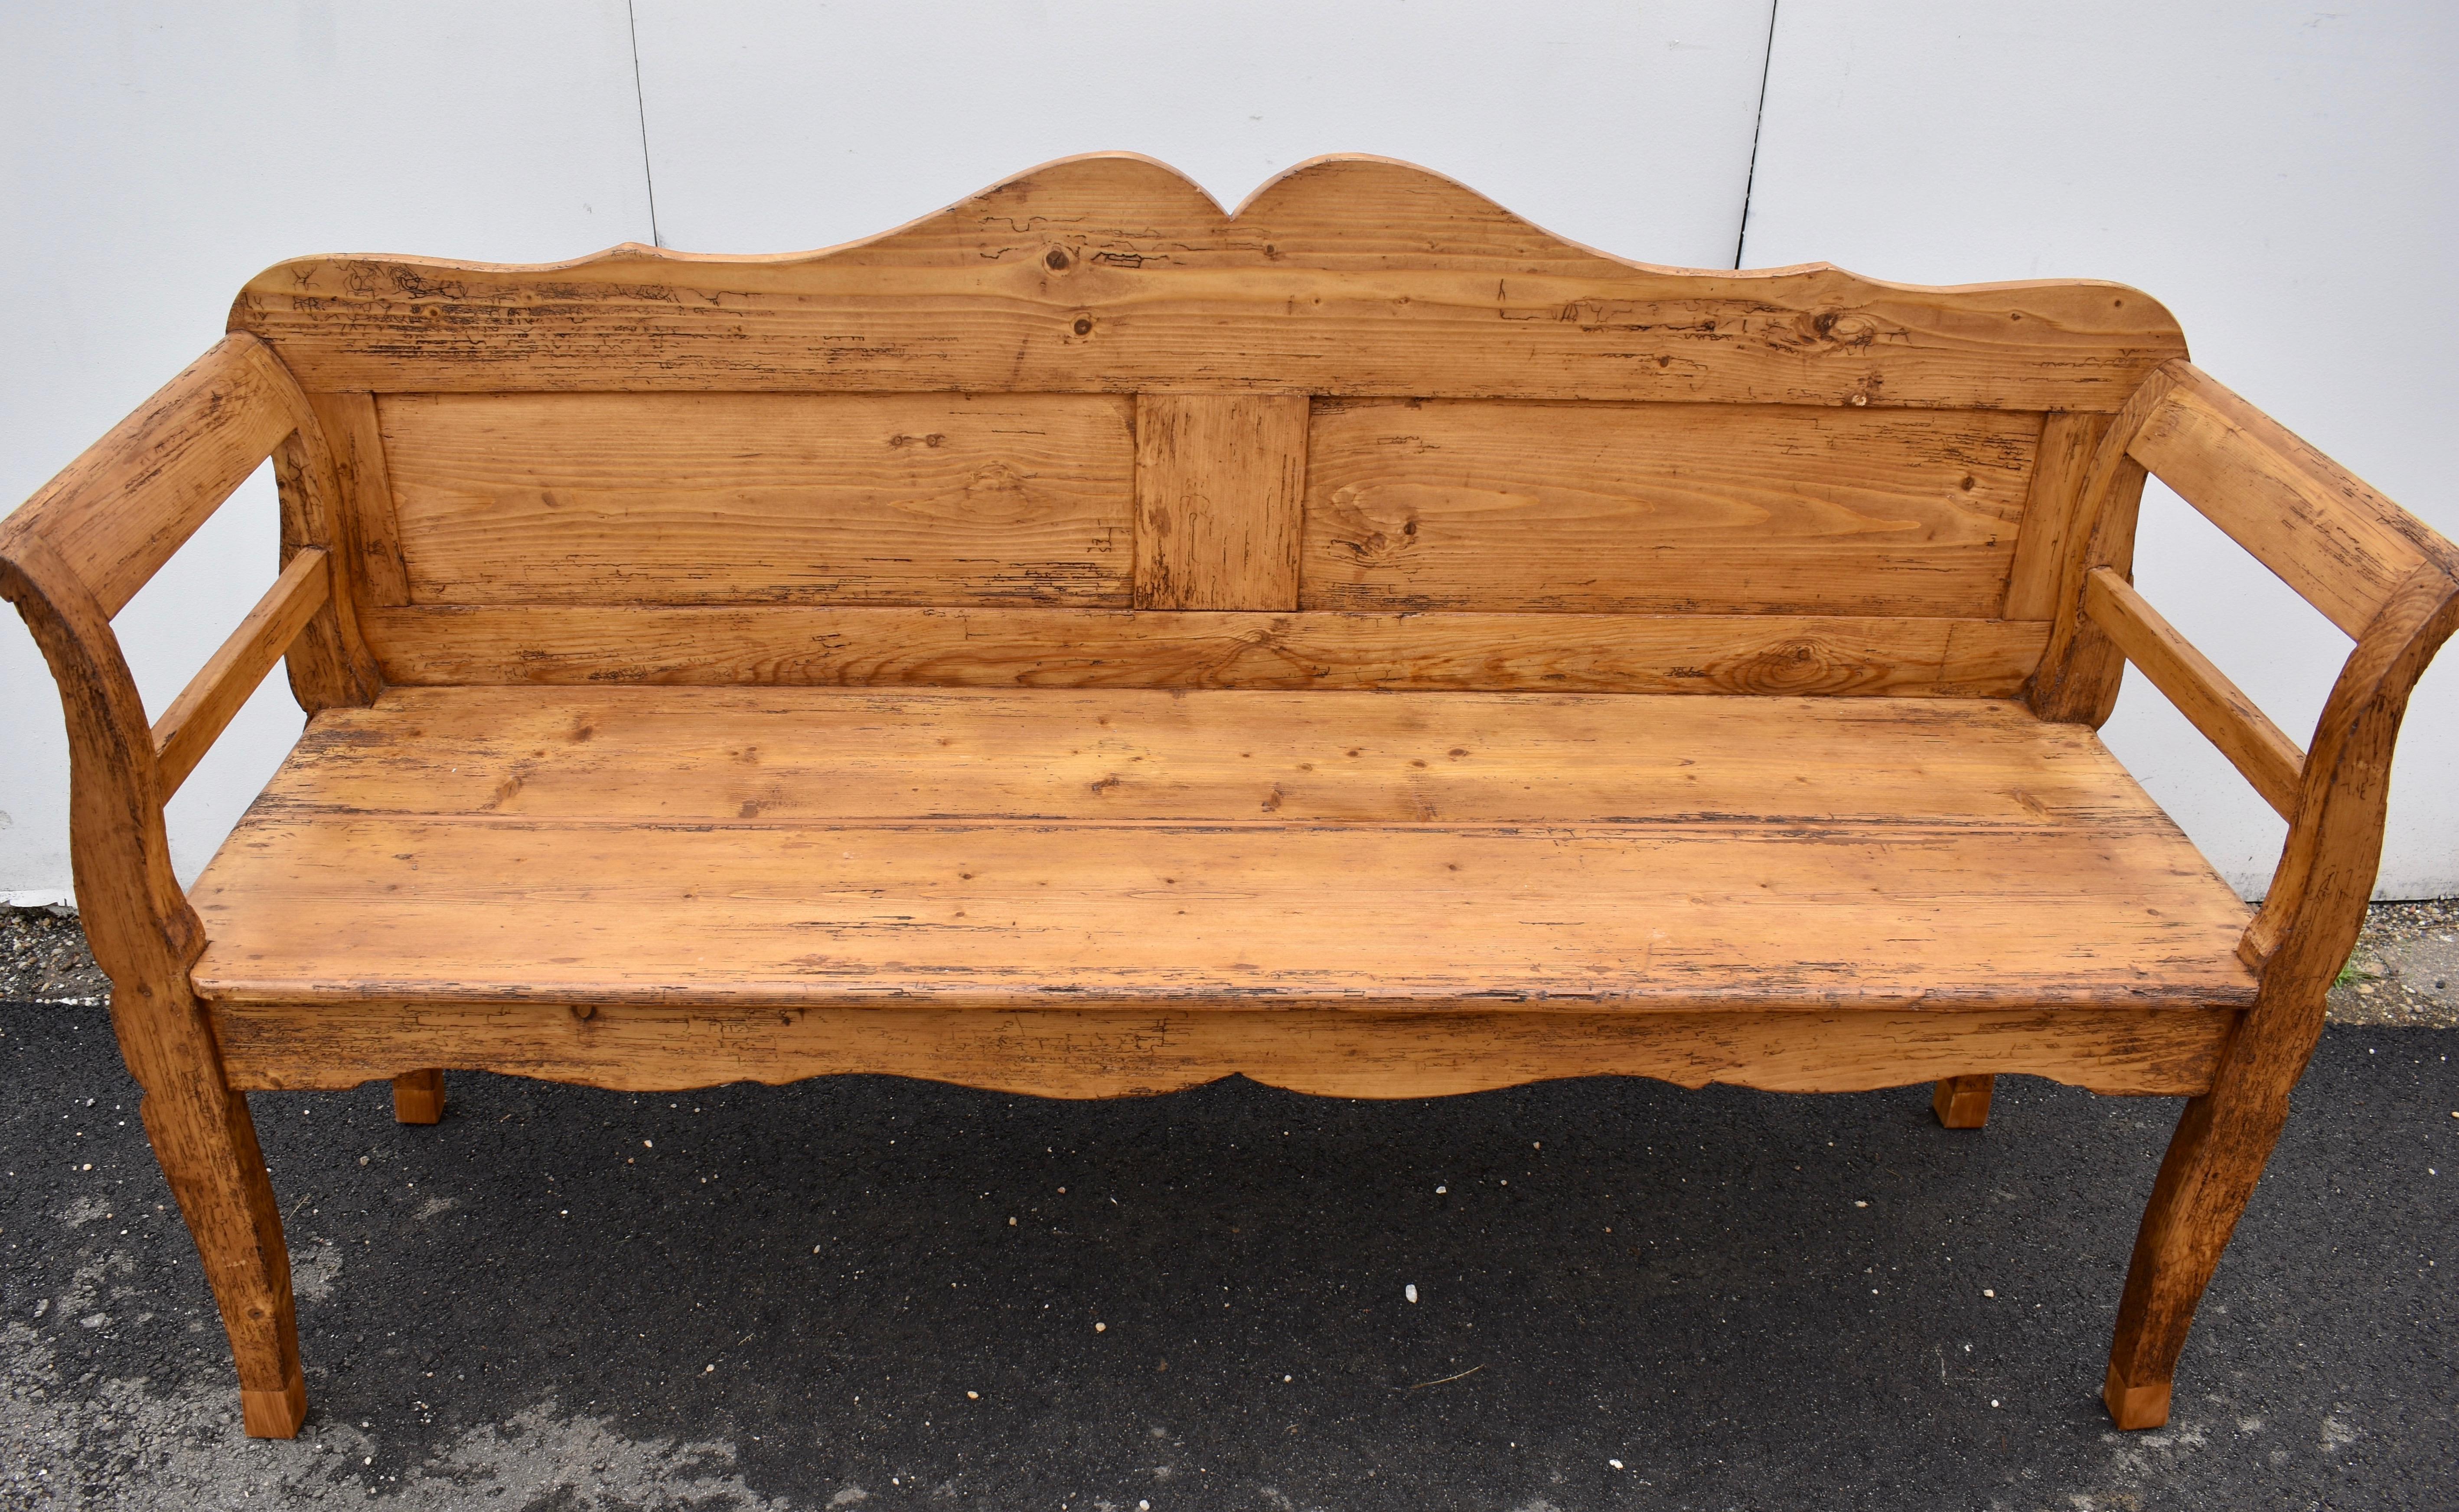 This bench has the classic lines we like to see in a Central European bench or settle. The back top rail is boldly scalloped and with the bottom rail encloses two rectangular flat panels. All four legs are nicely shaped and the integral arms have a